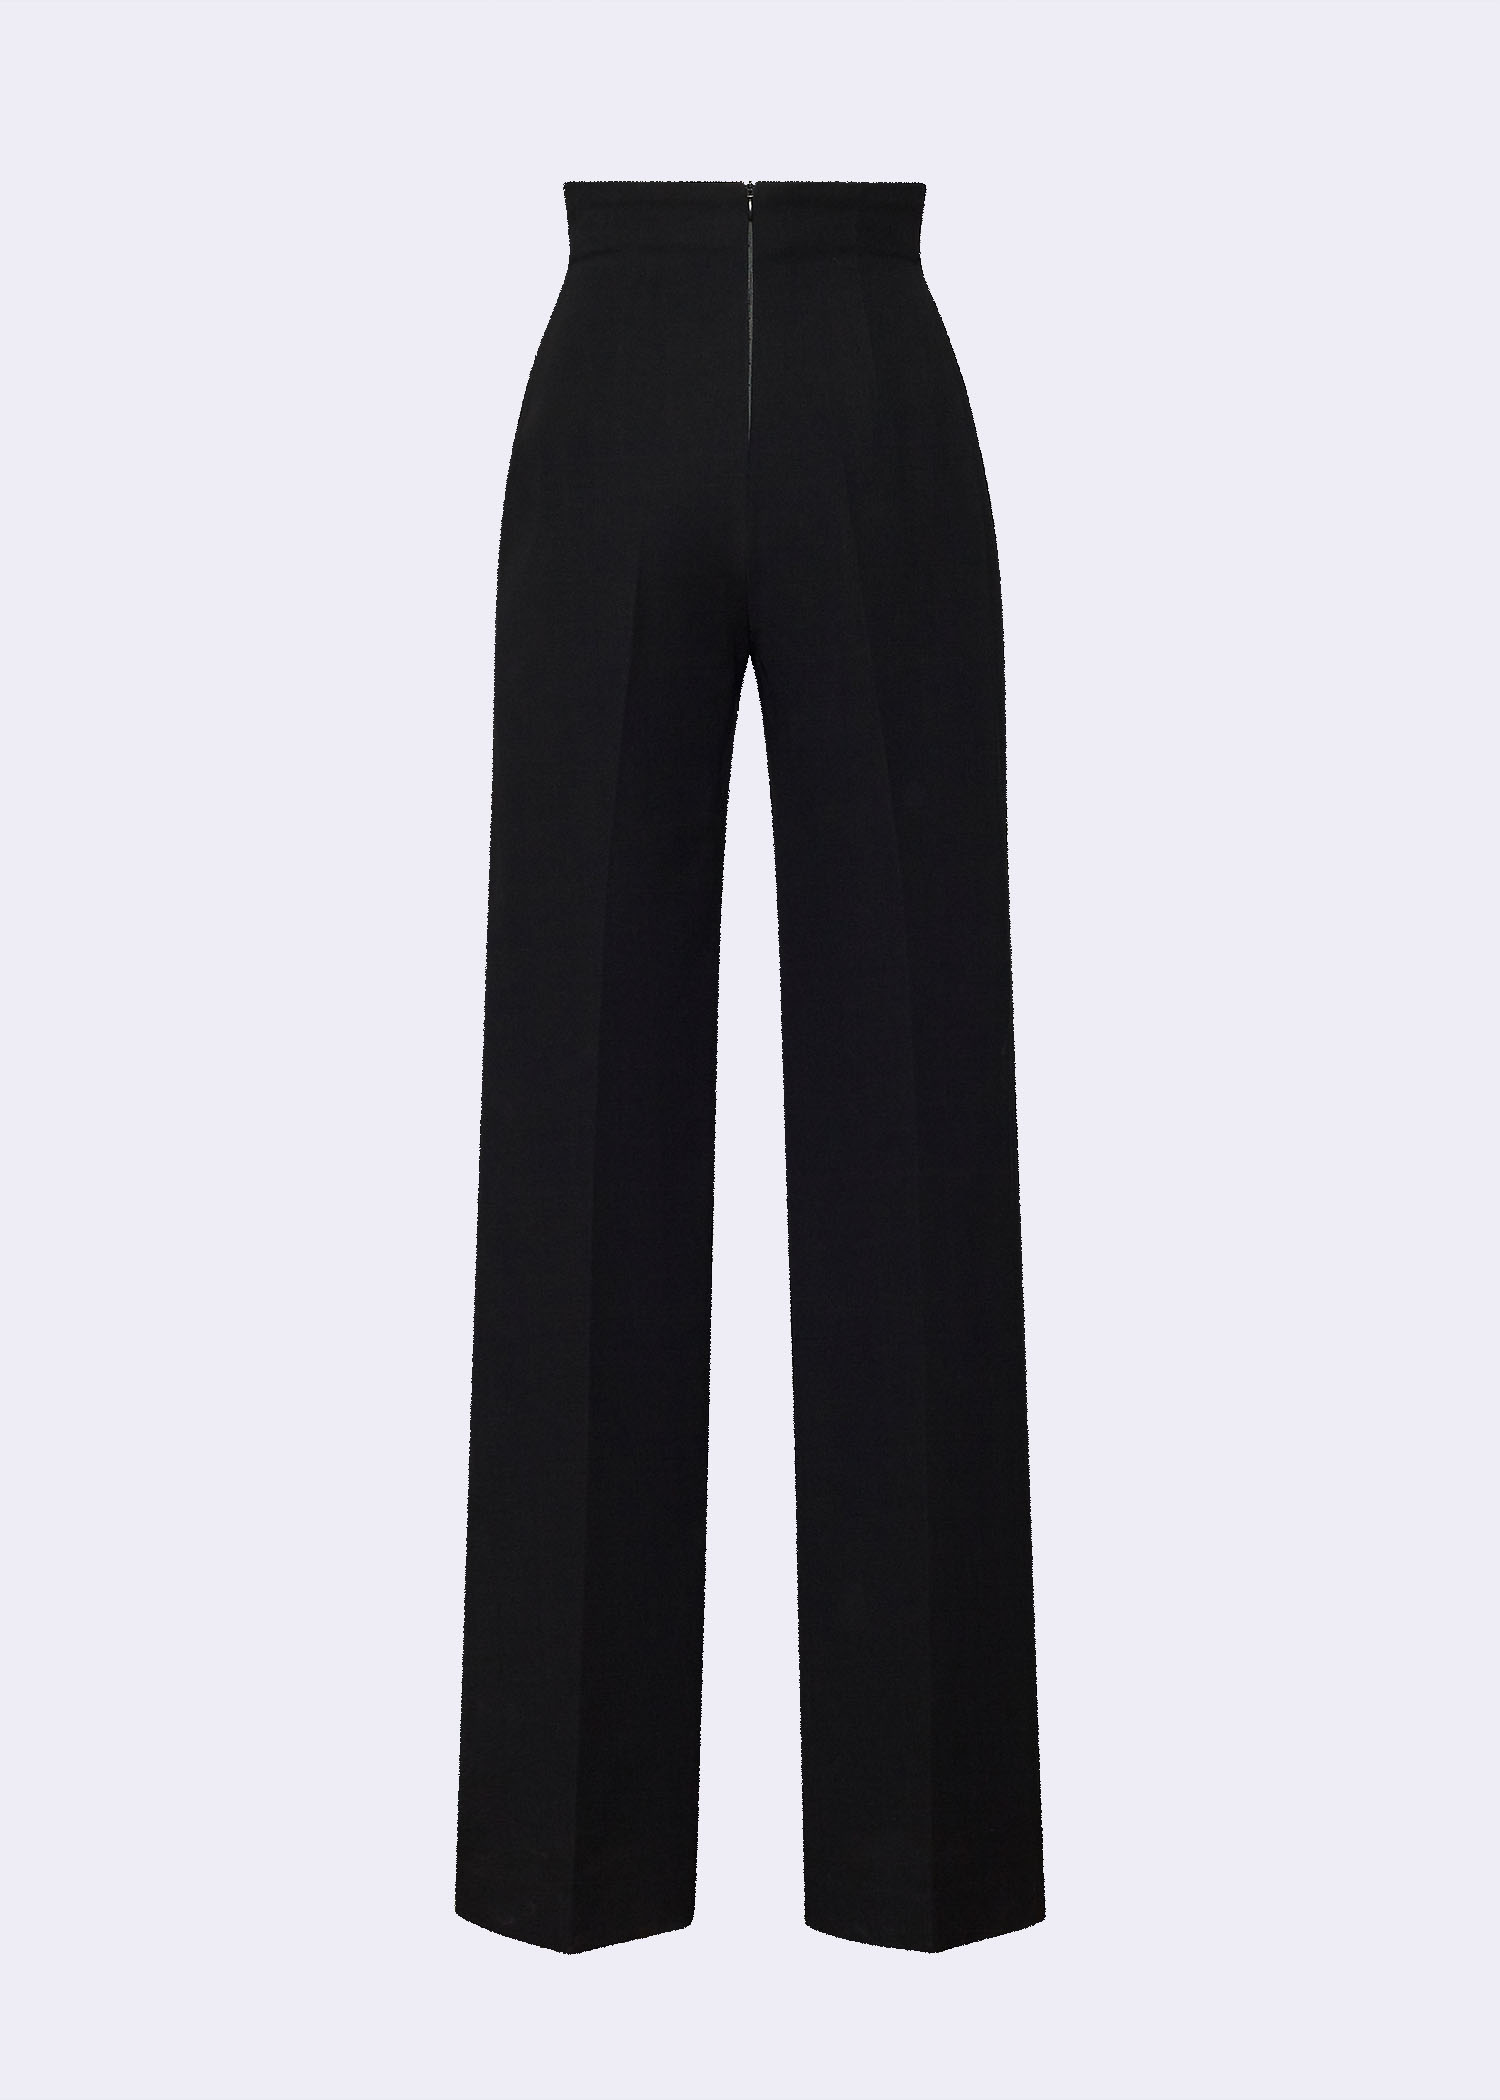 3047 Black - Polyester Pants With Pearl - POEM